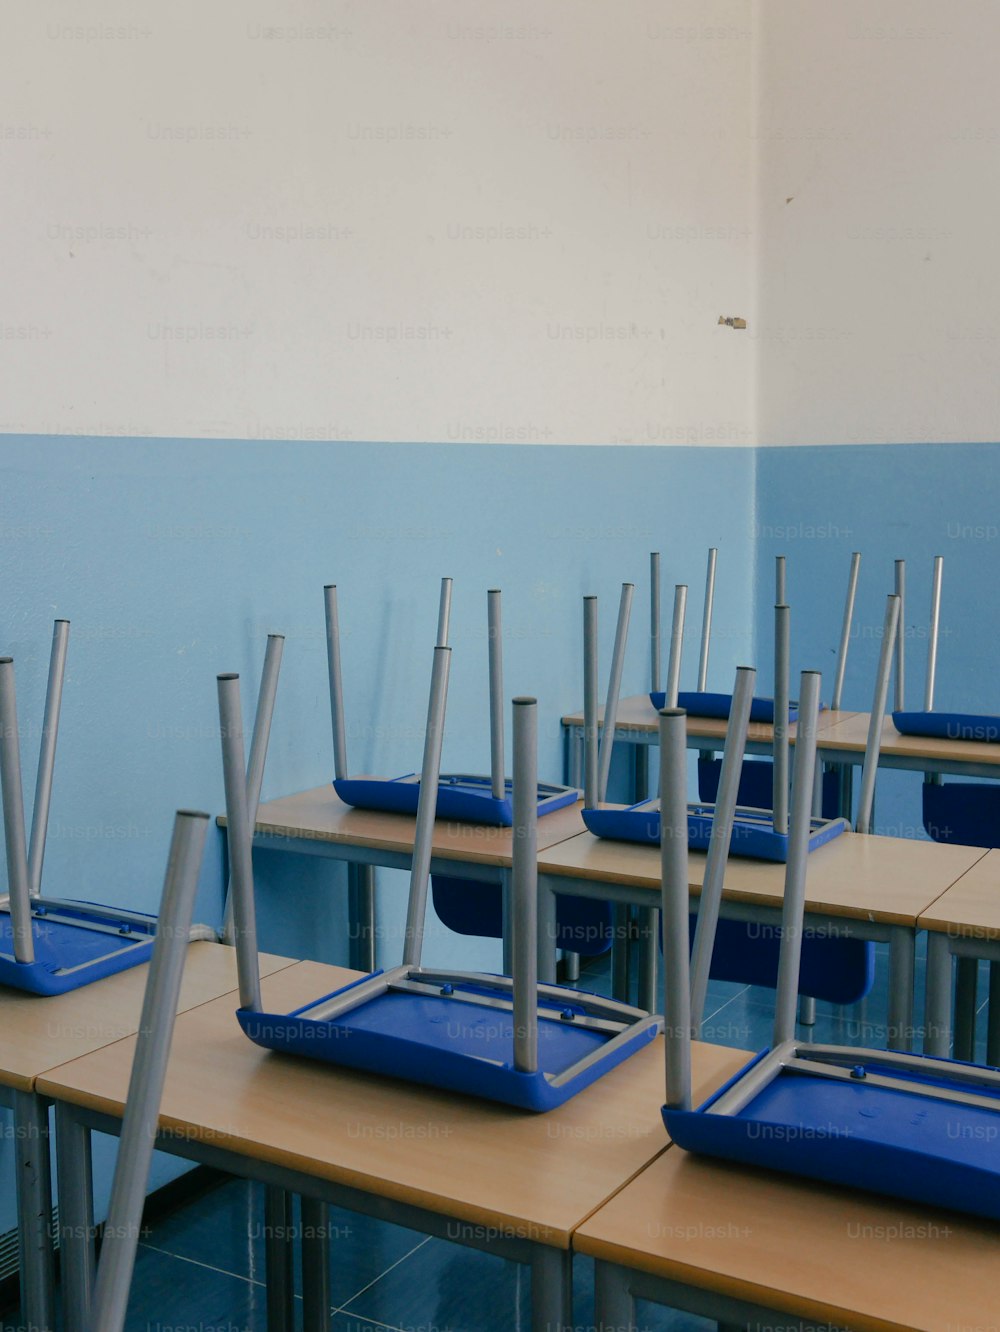 a row of desks with blue trays on top of them